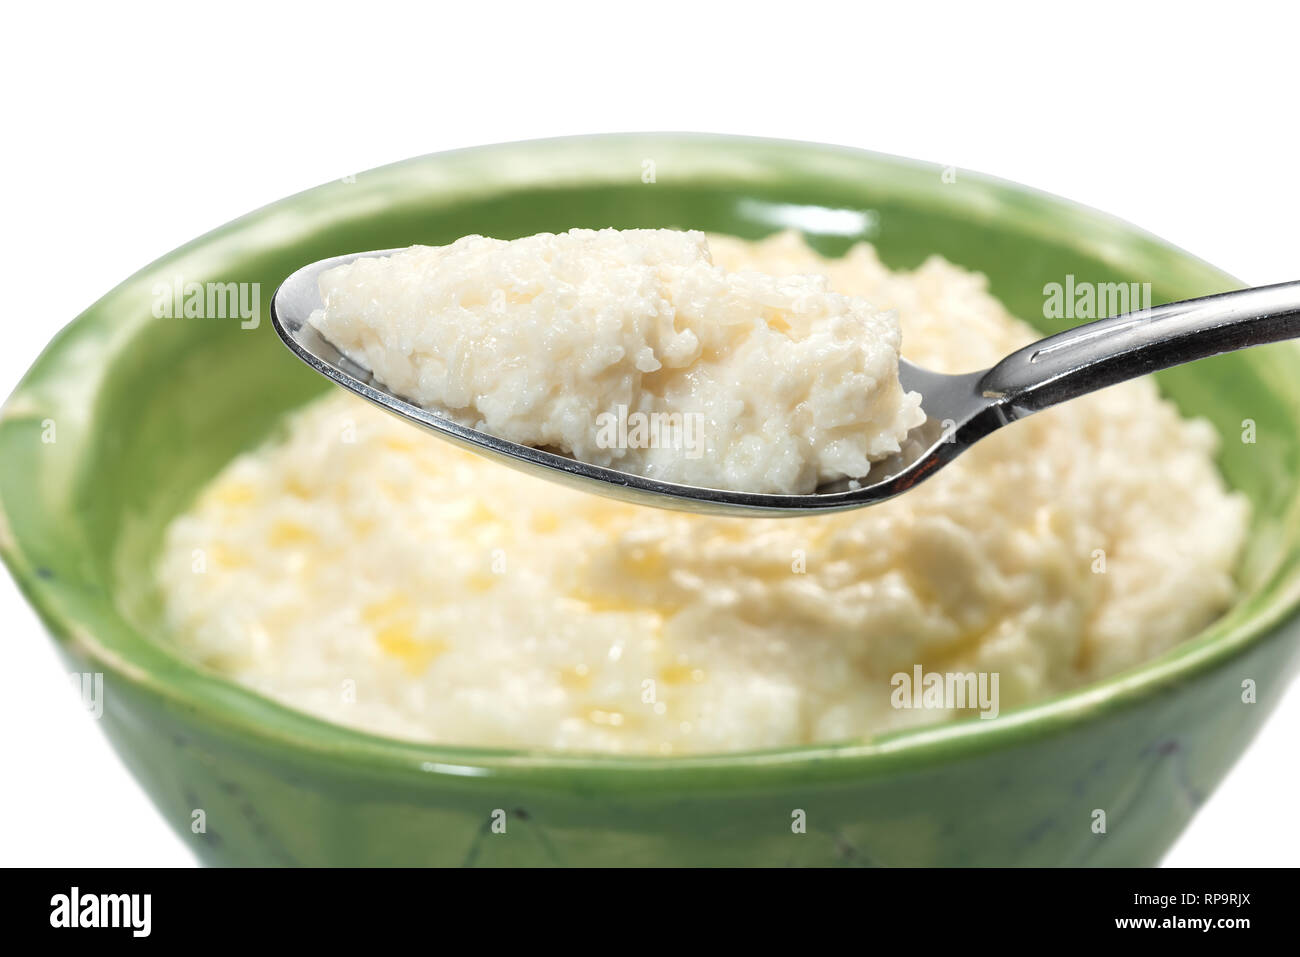 Rice porridge for breakfast with butter in a green bowl and spoon. Stock Photo